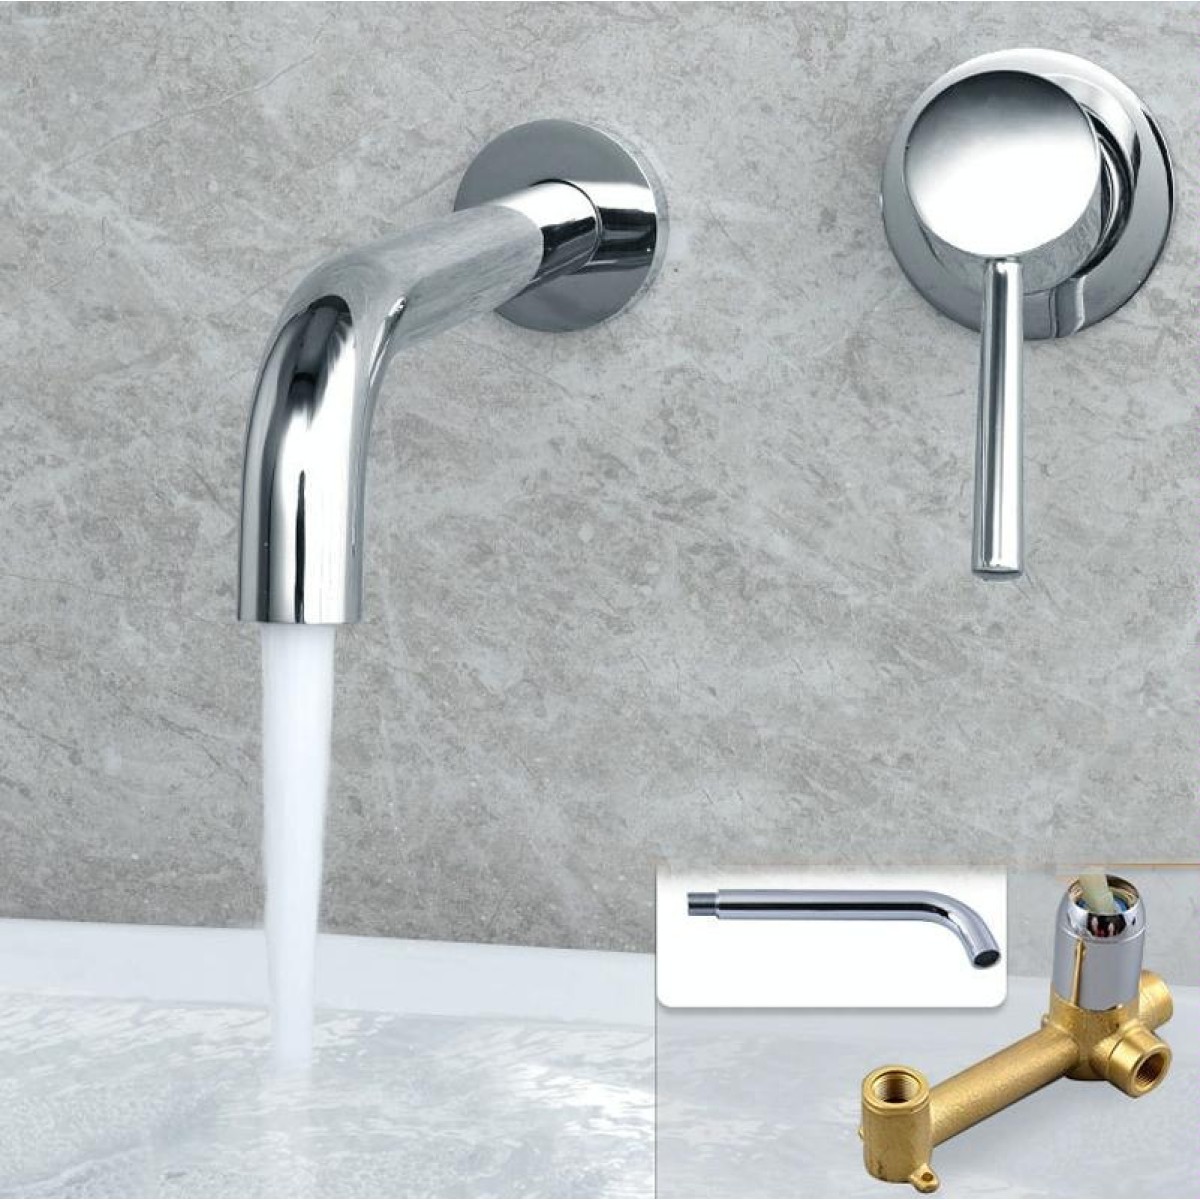 In-wall Hidden Concealed Faucet Hot and Cold Copper Mixing Valve, Specification: Silver Conjoined